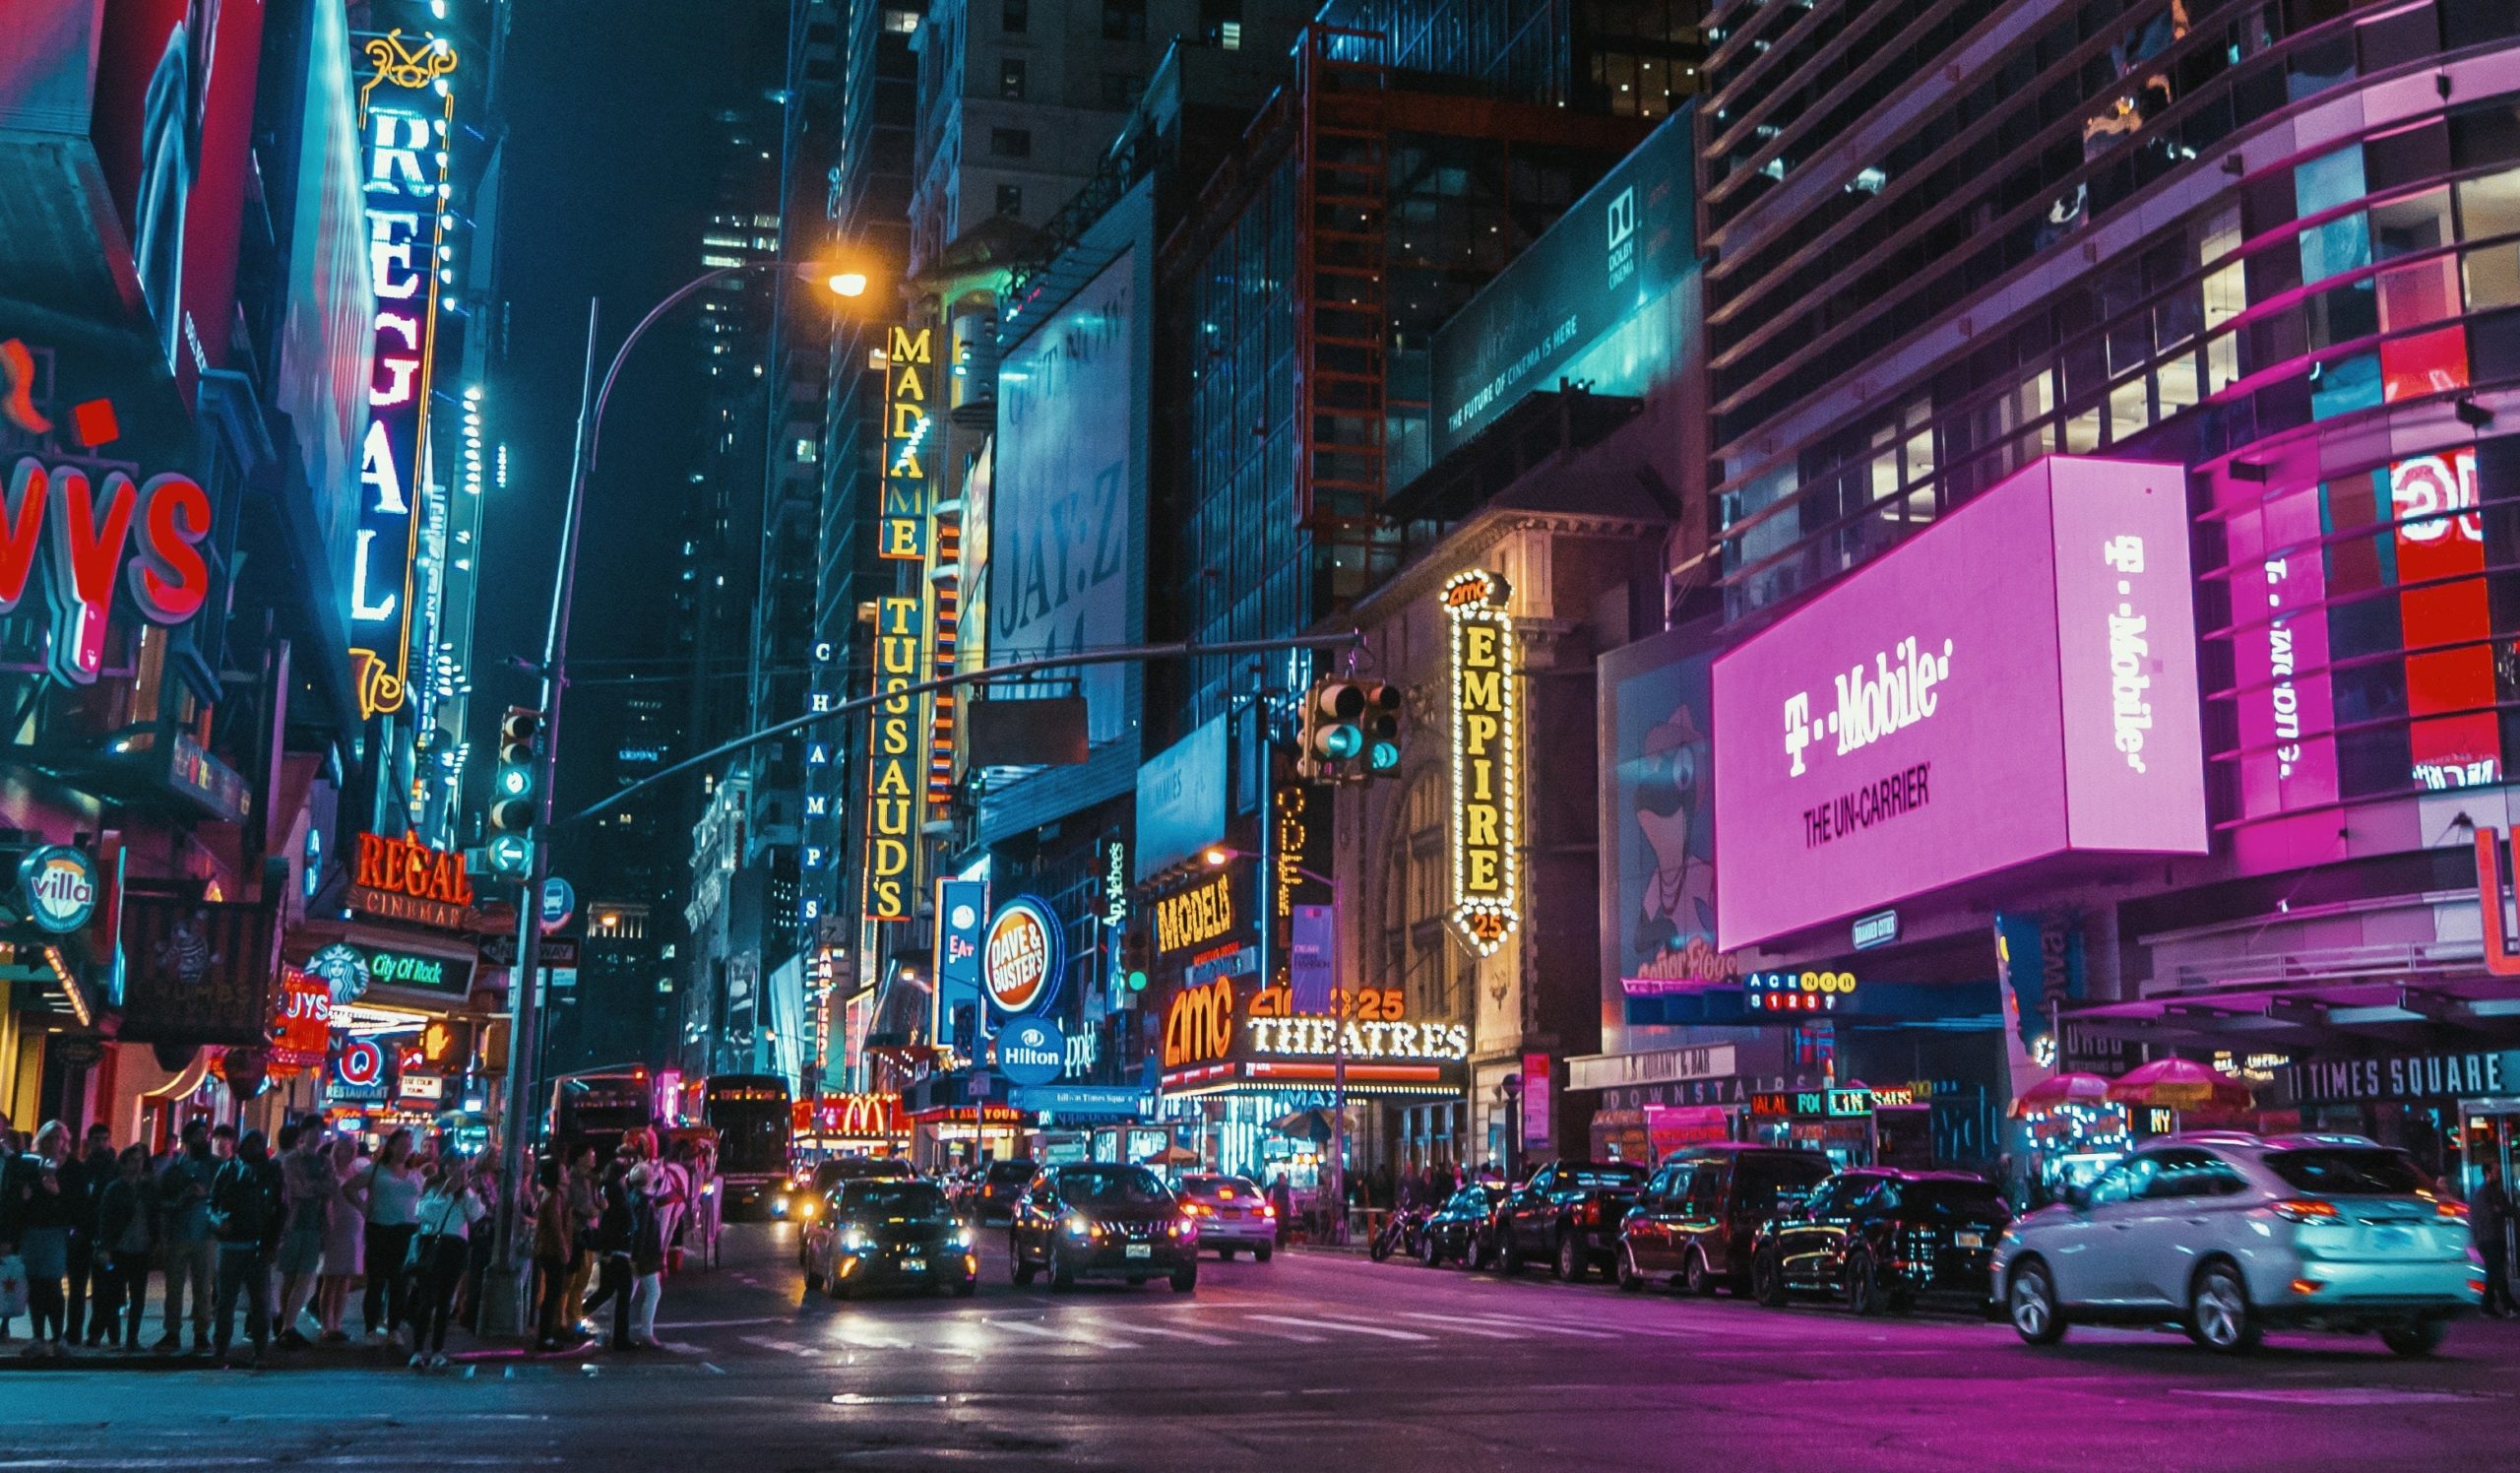 Brands and logos displayed in a city nightscape.